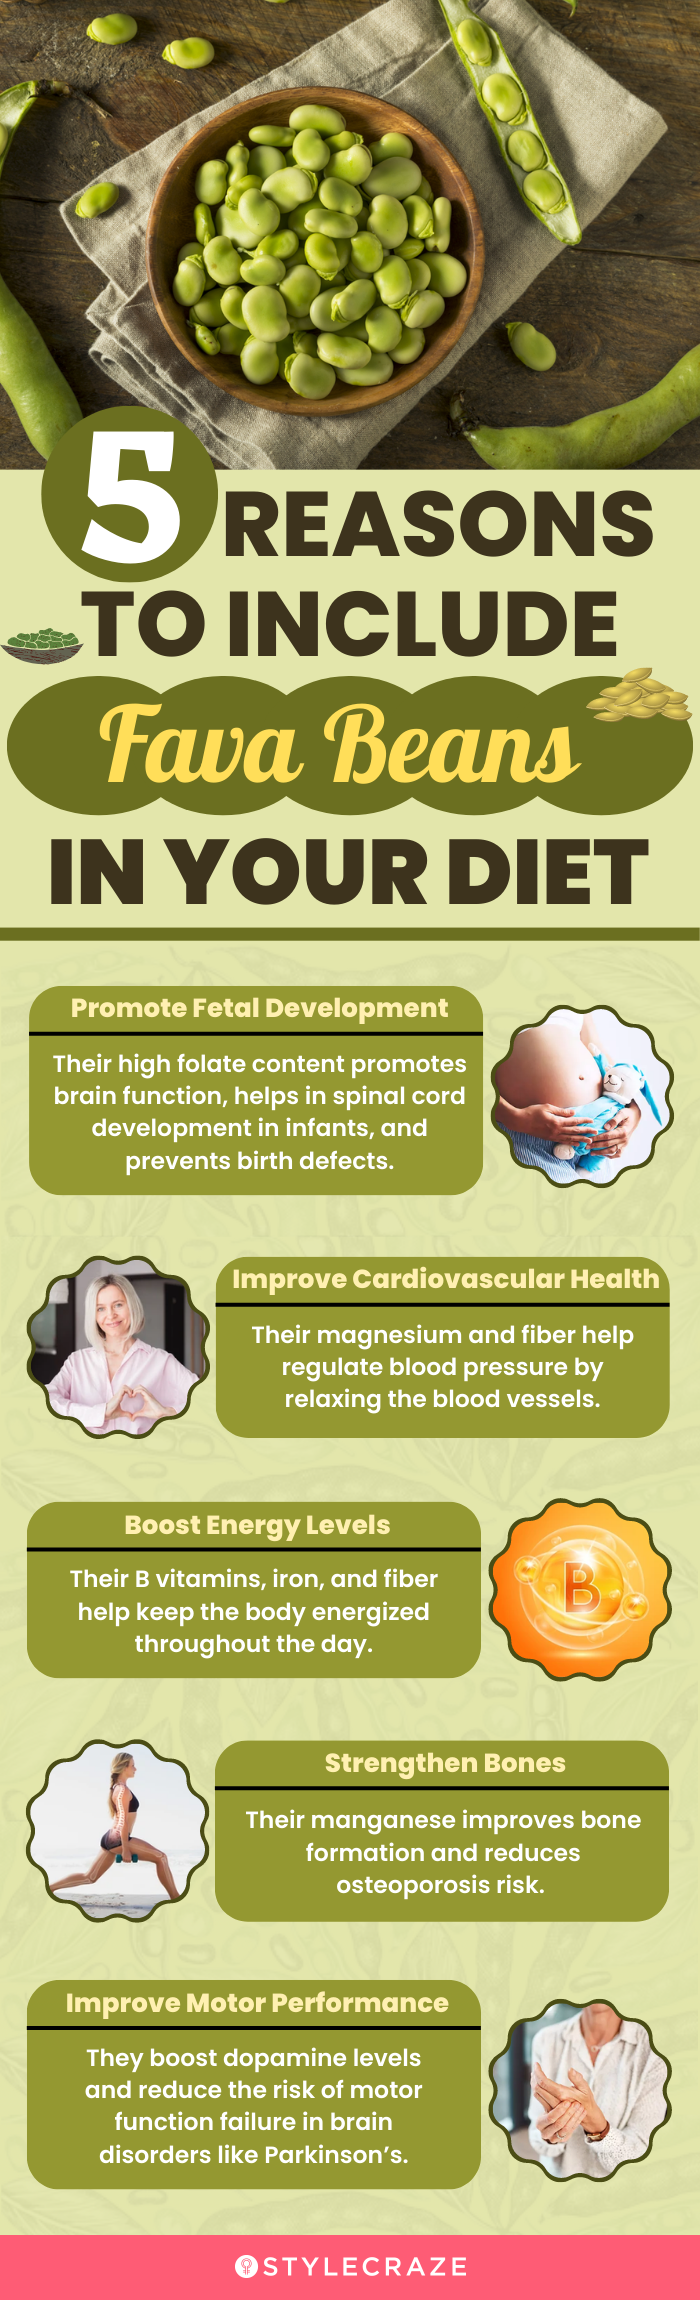 5 reasons to include fava beans in your diet (infographic)